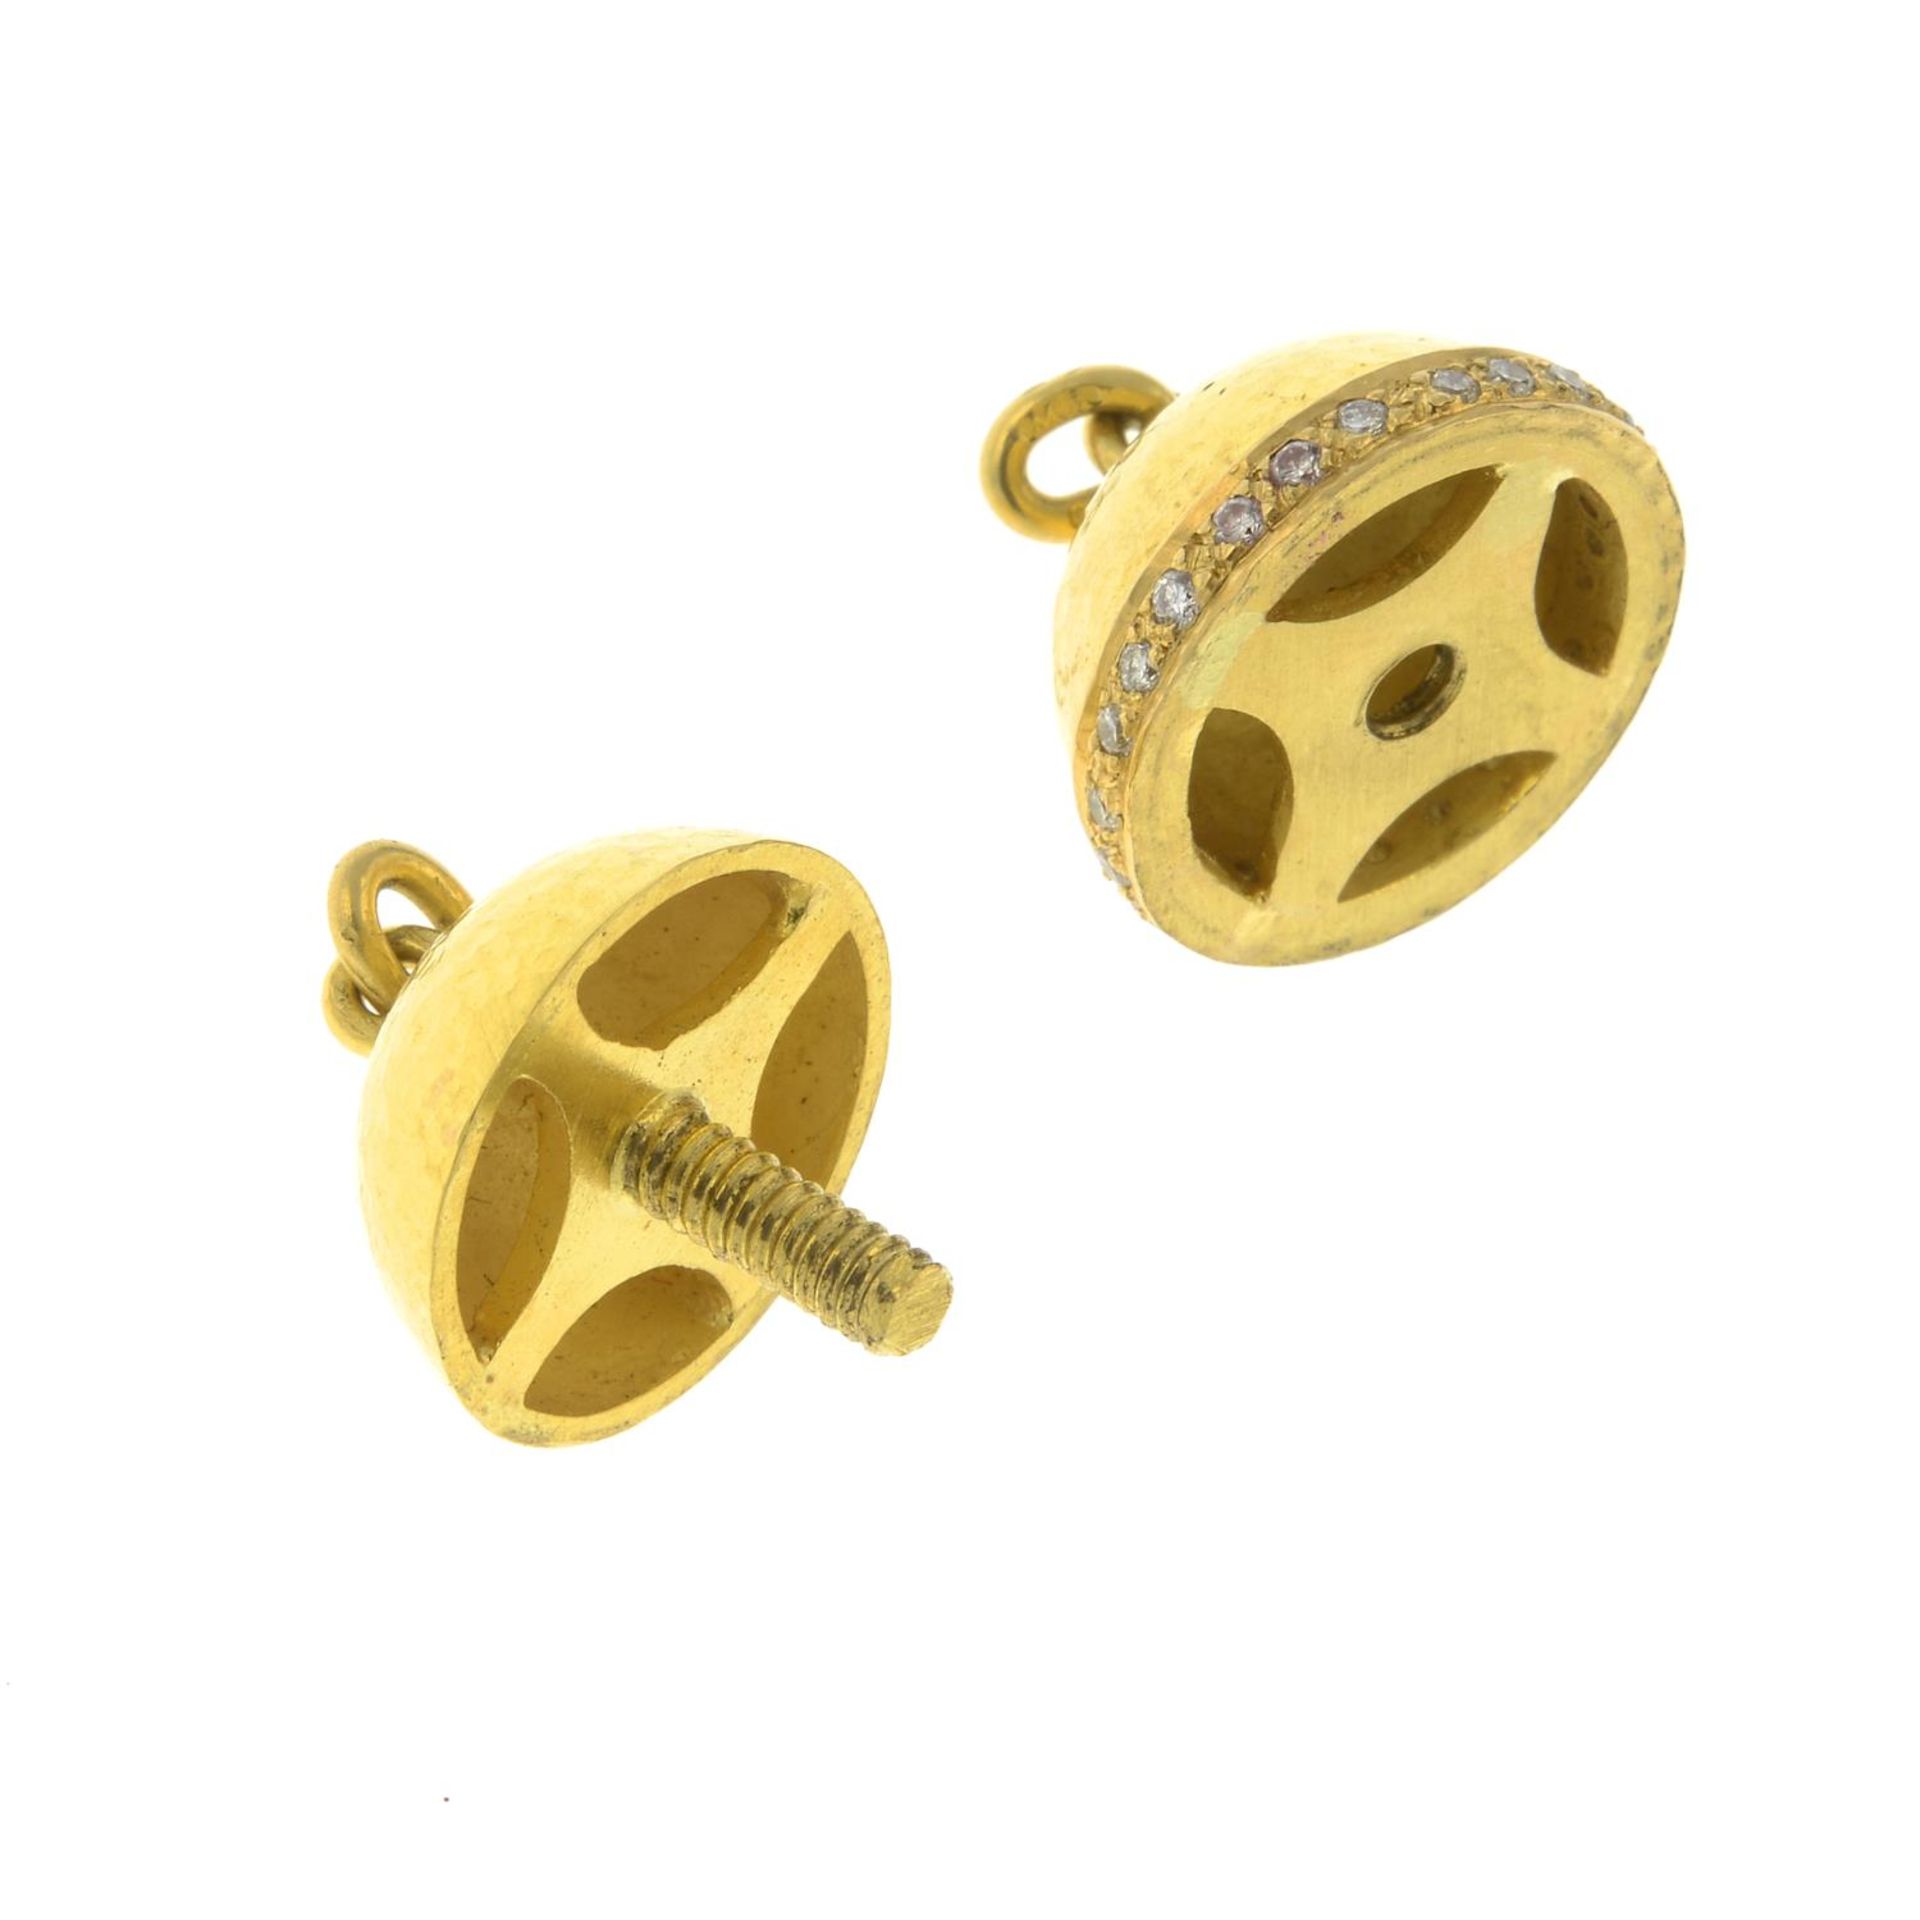 An 18ct gold diamond spherical screw clasp.Estimated total diamond weight 0.20ct. - Image 2 of 2